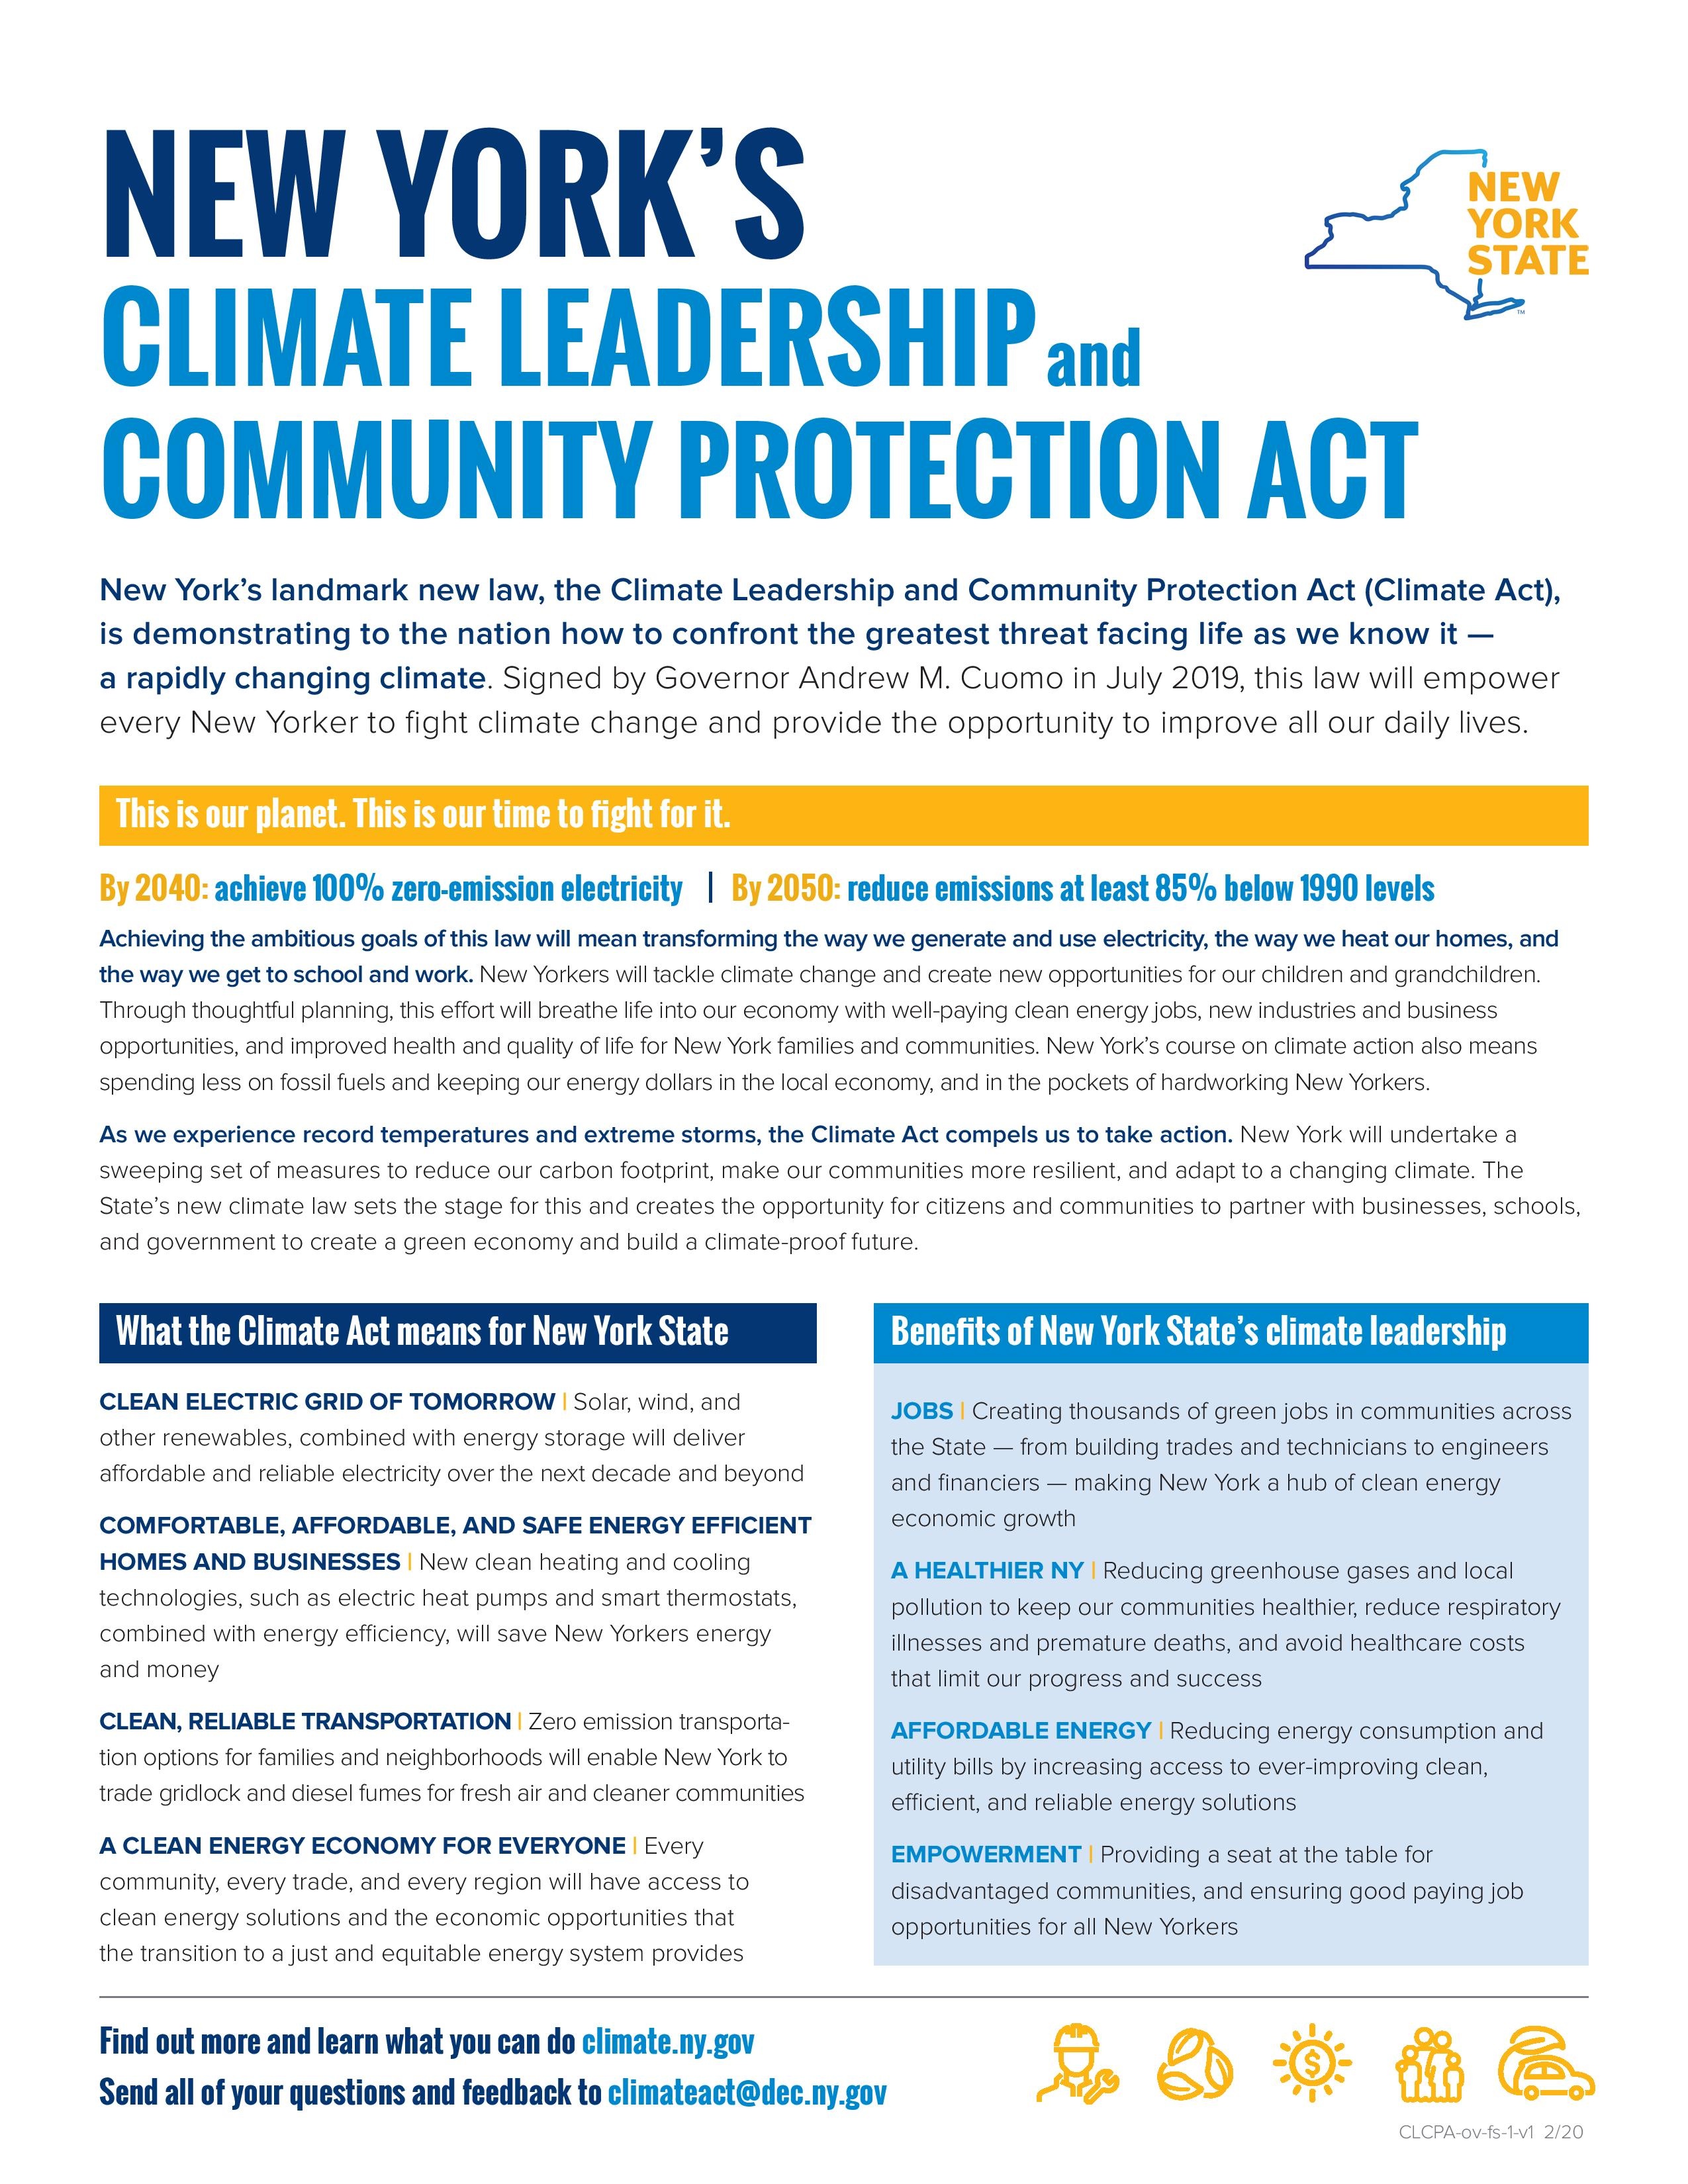 New York Climate Leadership and Community Protection Act (CLCPA) Fact Sheet